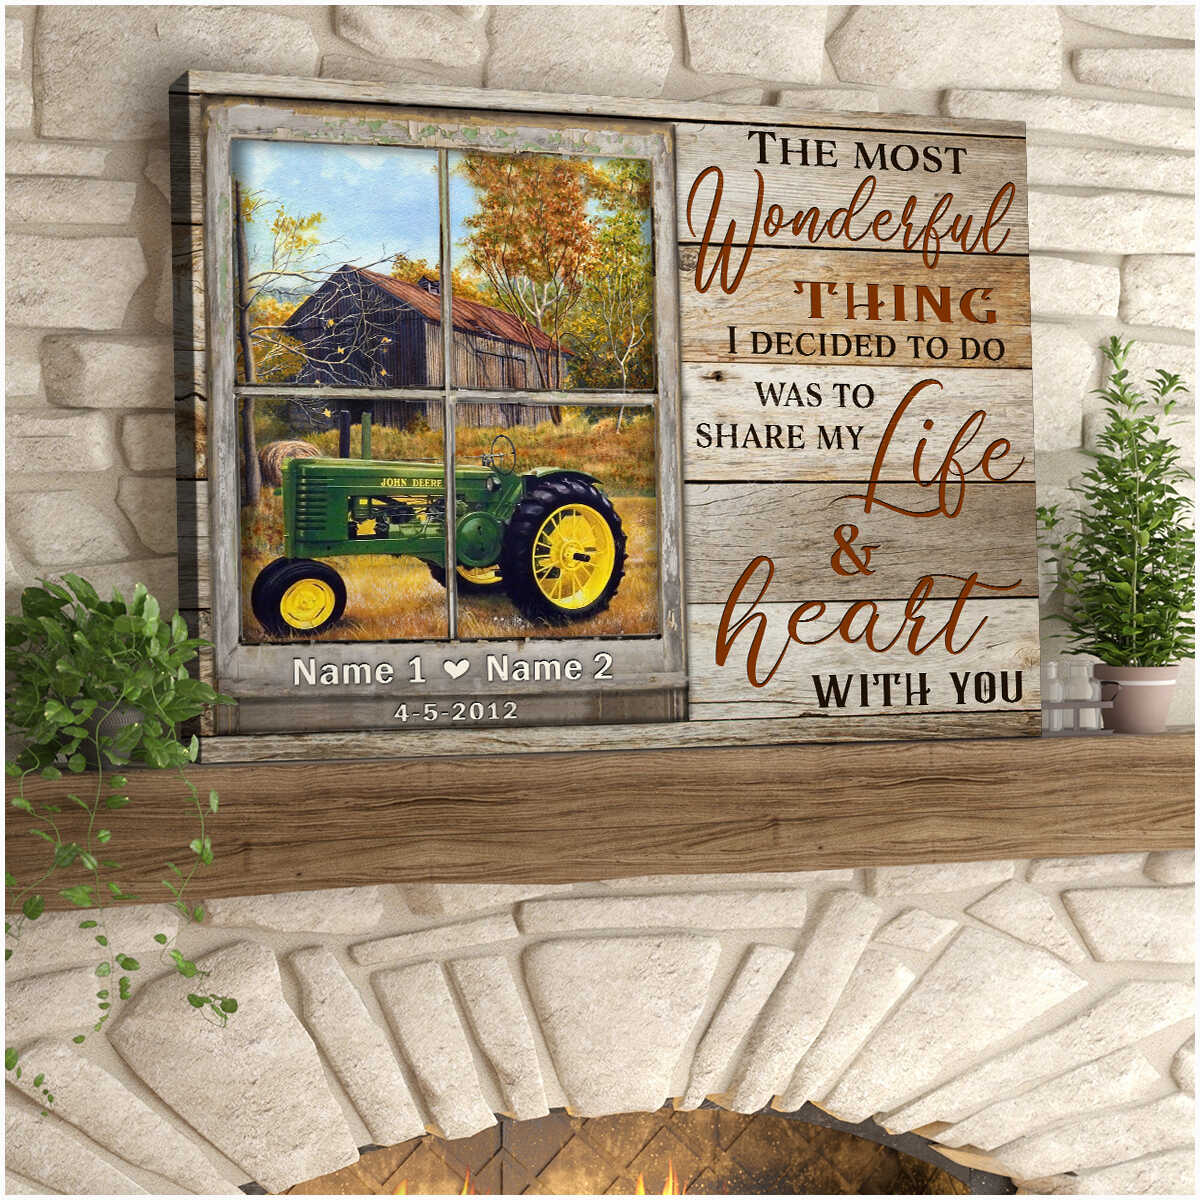 Romantic Personalized Vintage Barn And John Deere Tractor From Window The Most Wonderful Thing I Decided To Custom Name And Date Farmhouse Canvas Prints Wall Art Decor